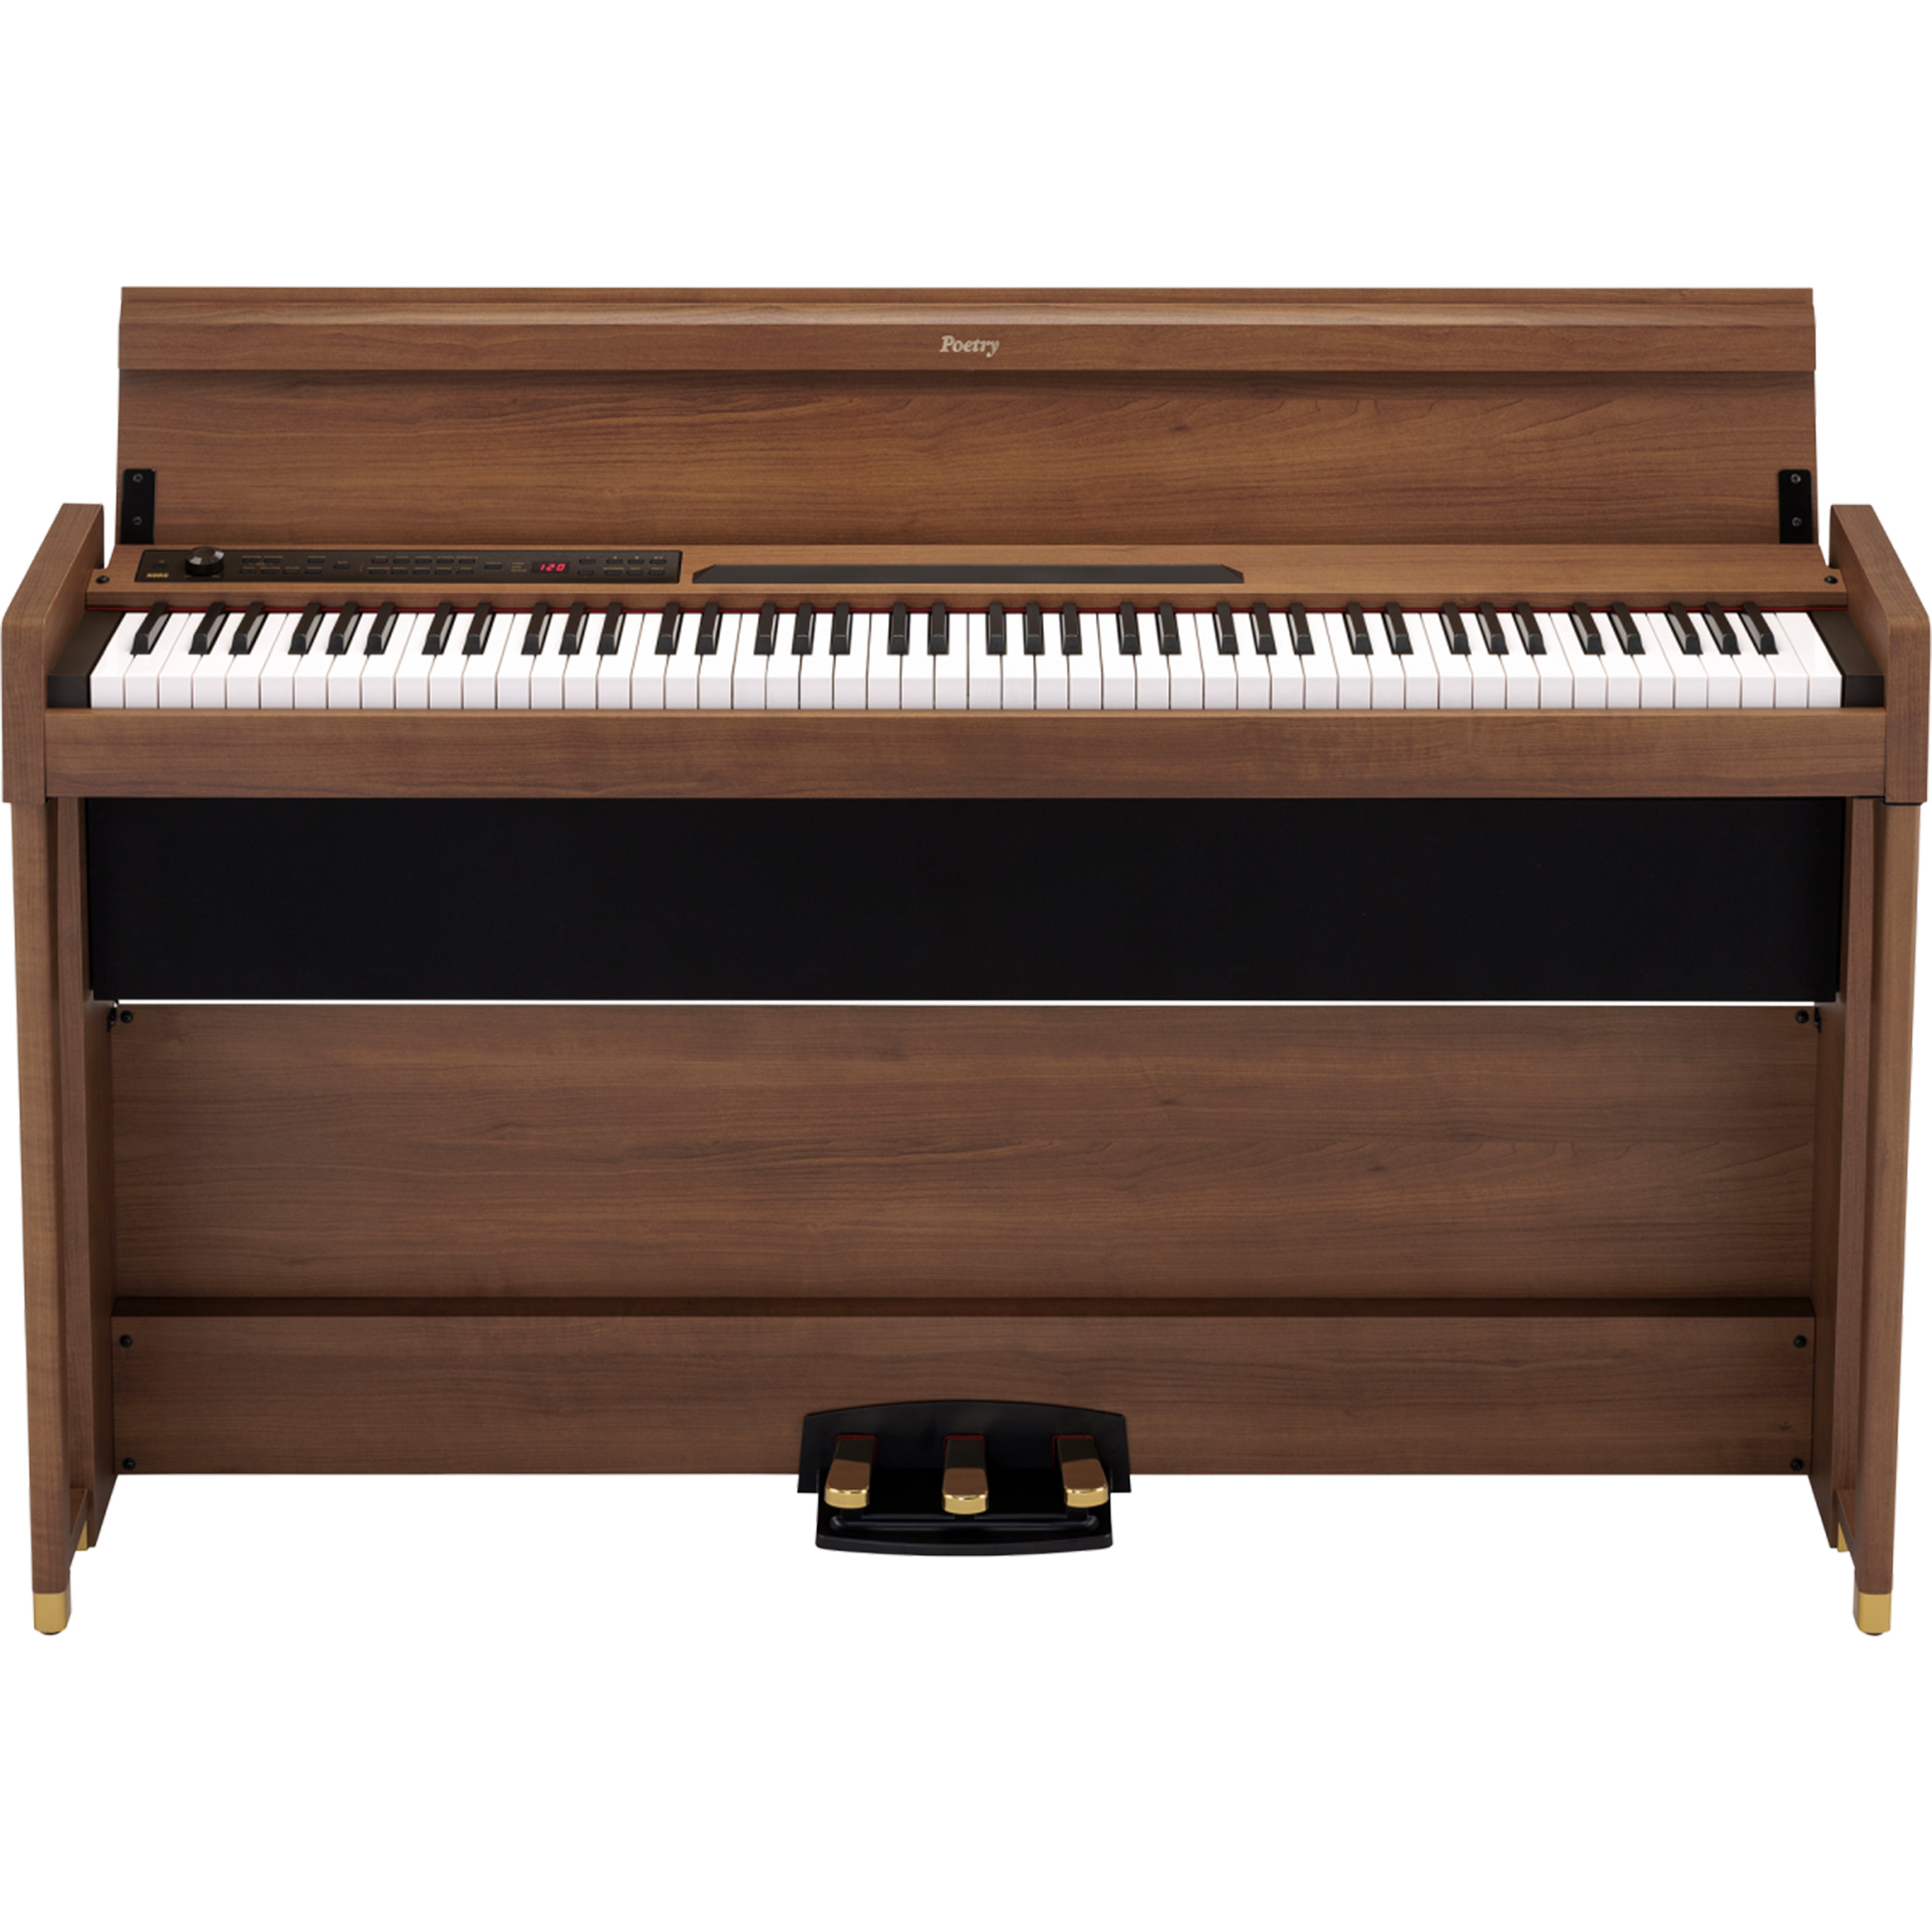 Korg Poetry Chopin-Inspired Digital Piano - Brown - front view